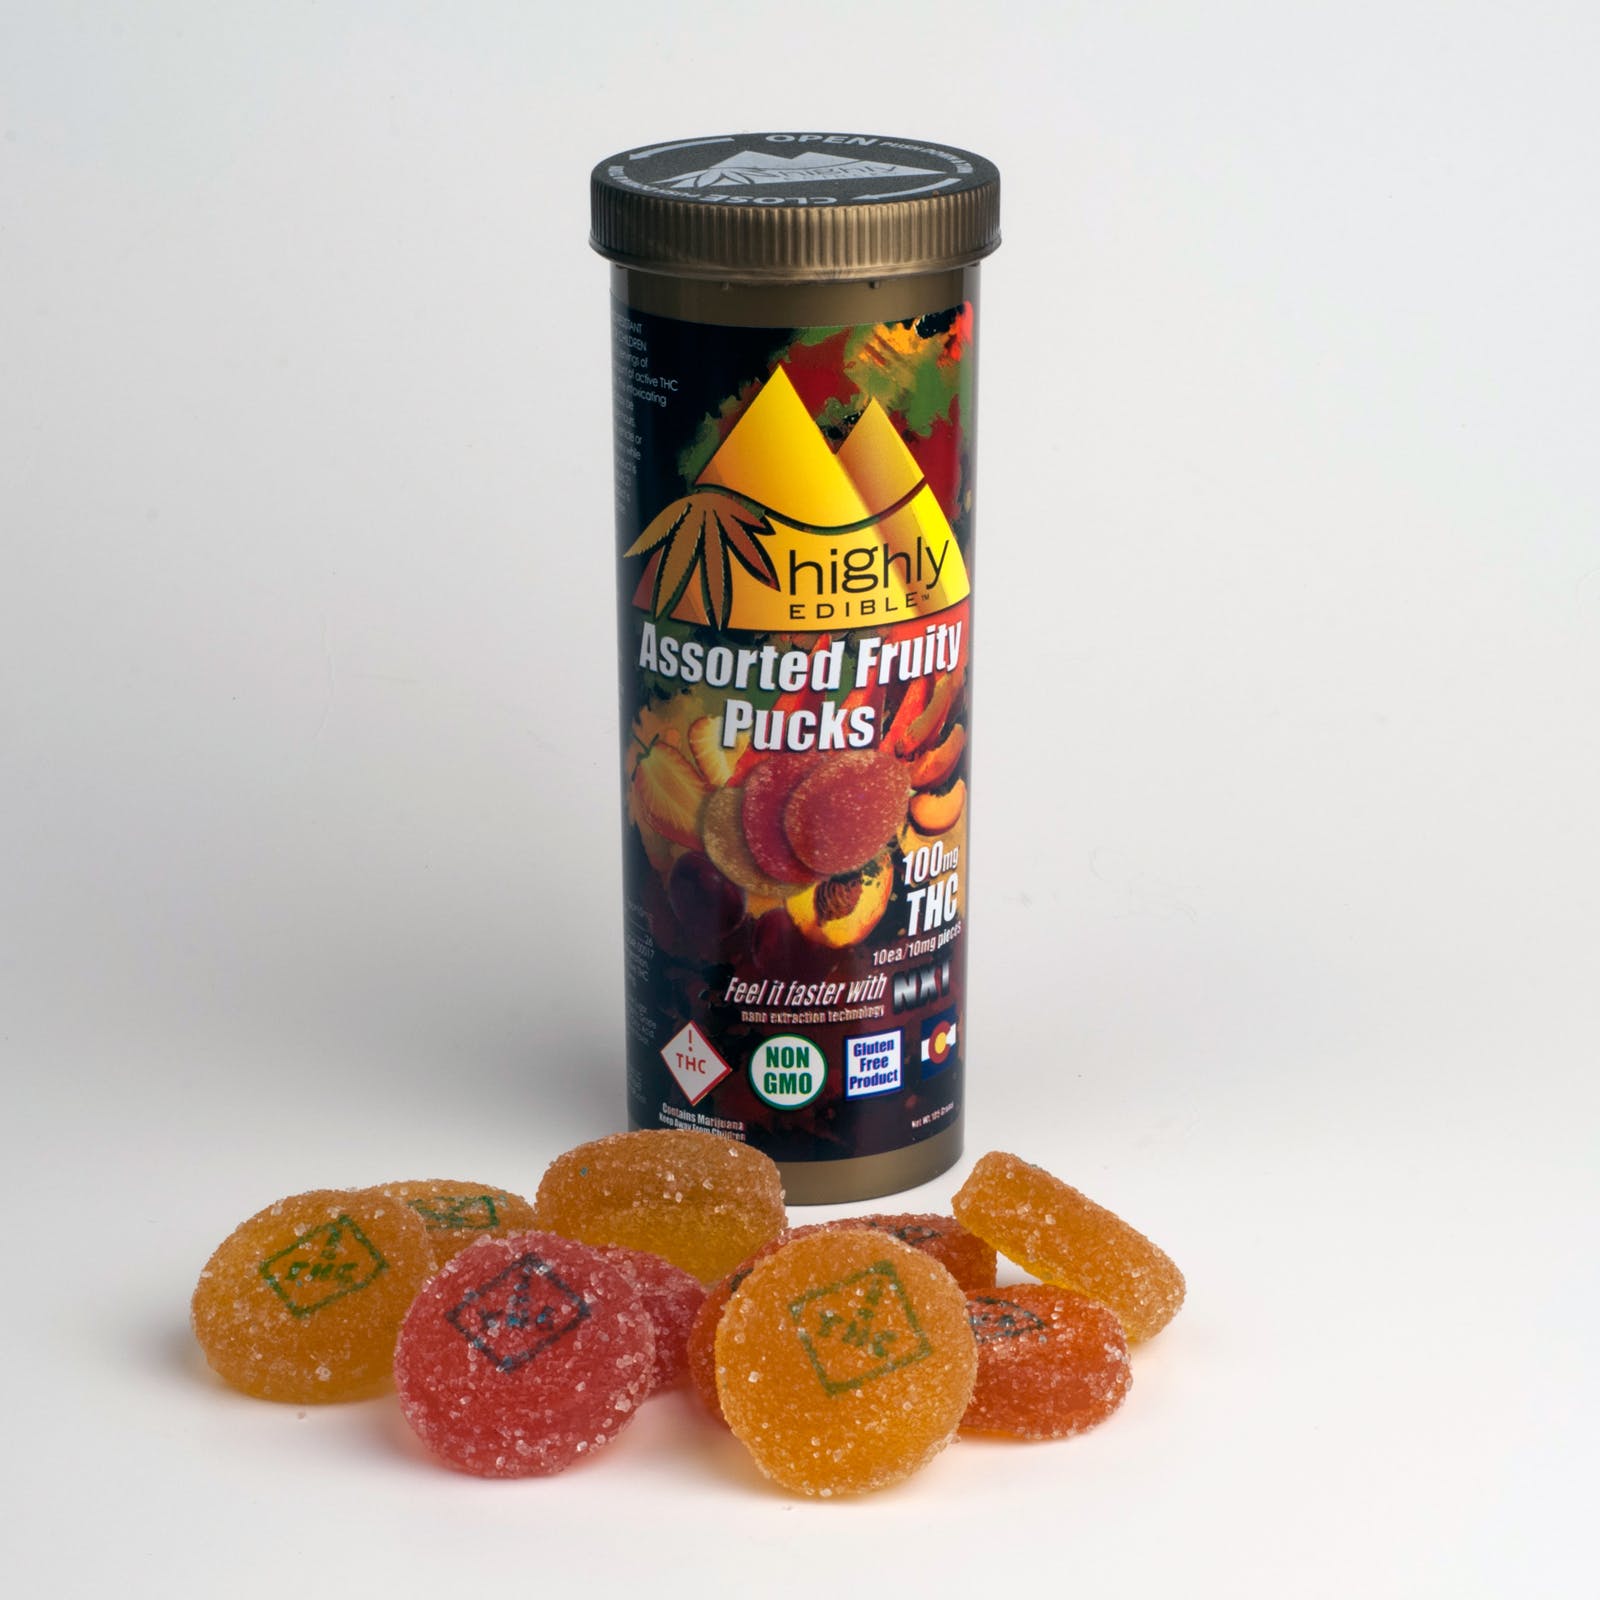 Highly Edible Gummies 250mg- Assorted Fruit Pucks (Tax Included)